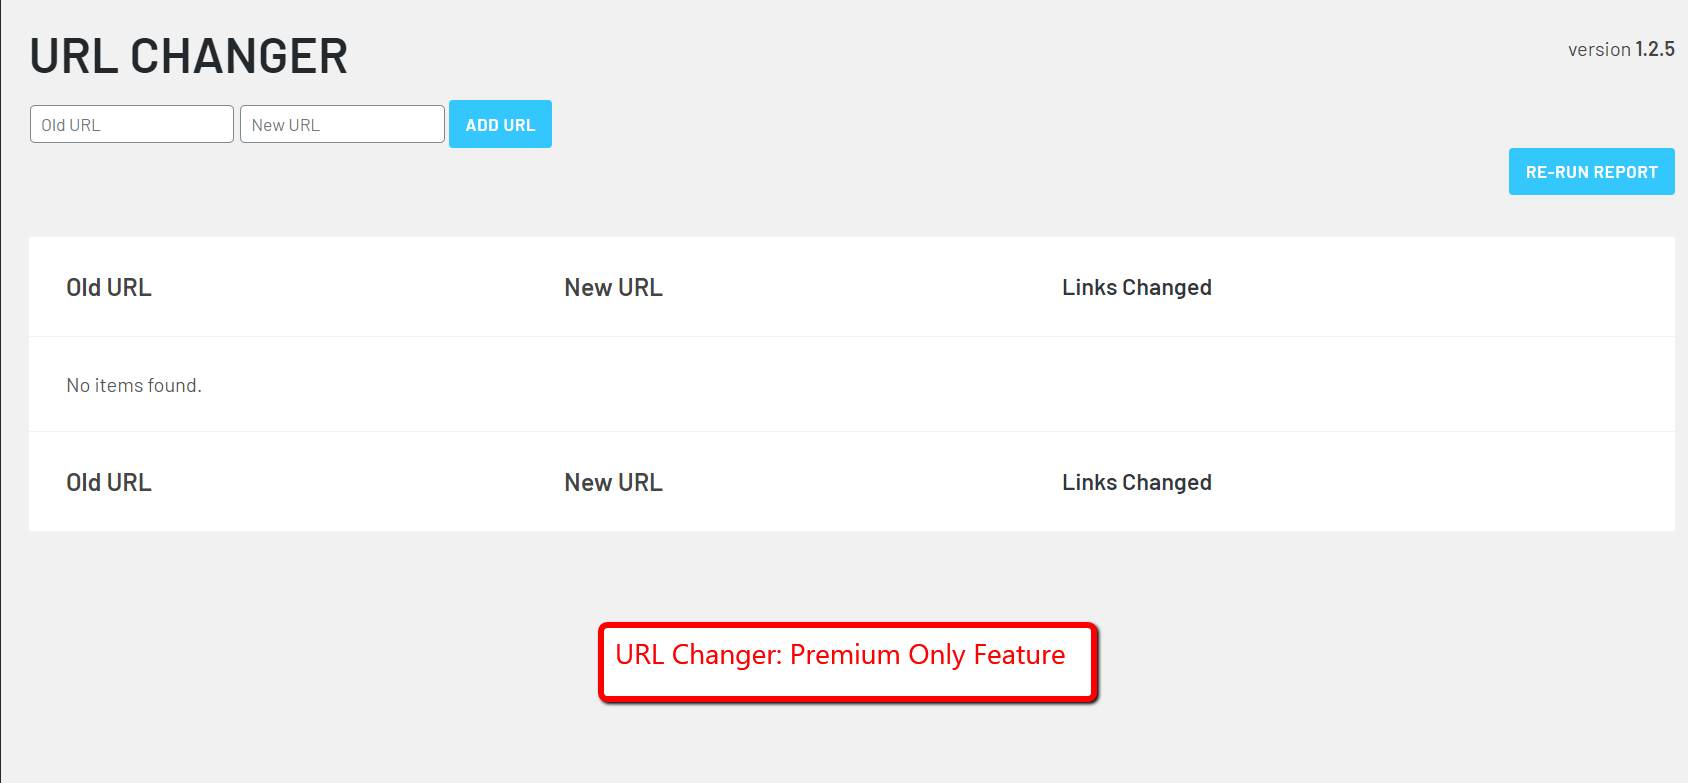 [Premium] The URL Changer allows you to update old links to point to new URLs.